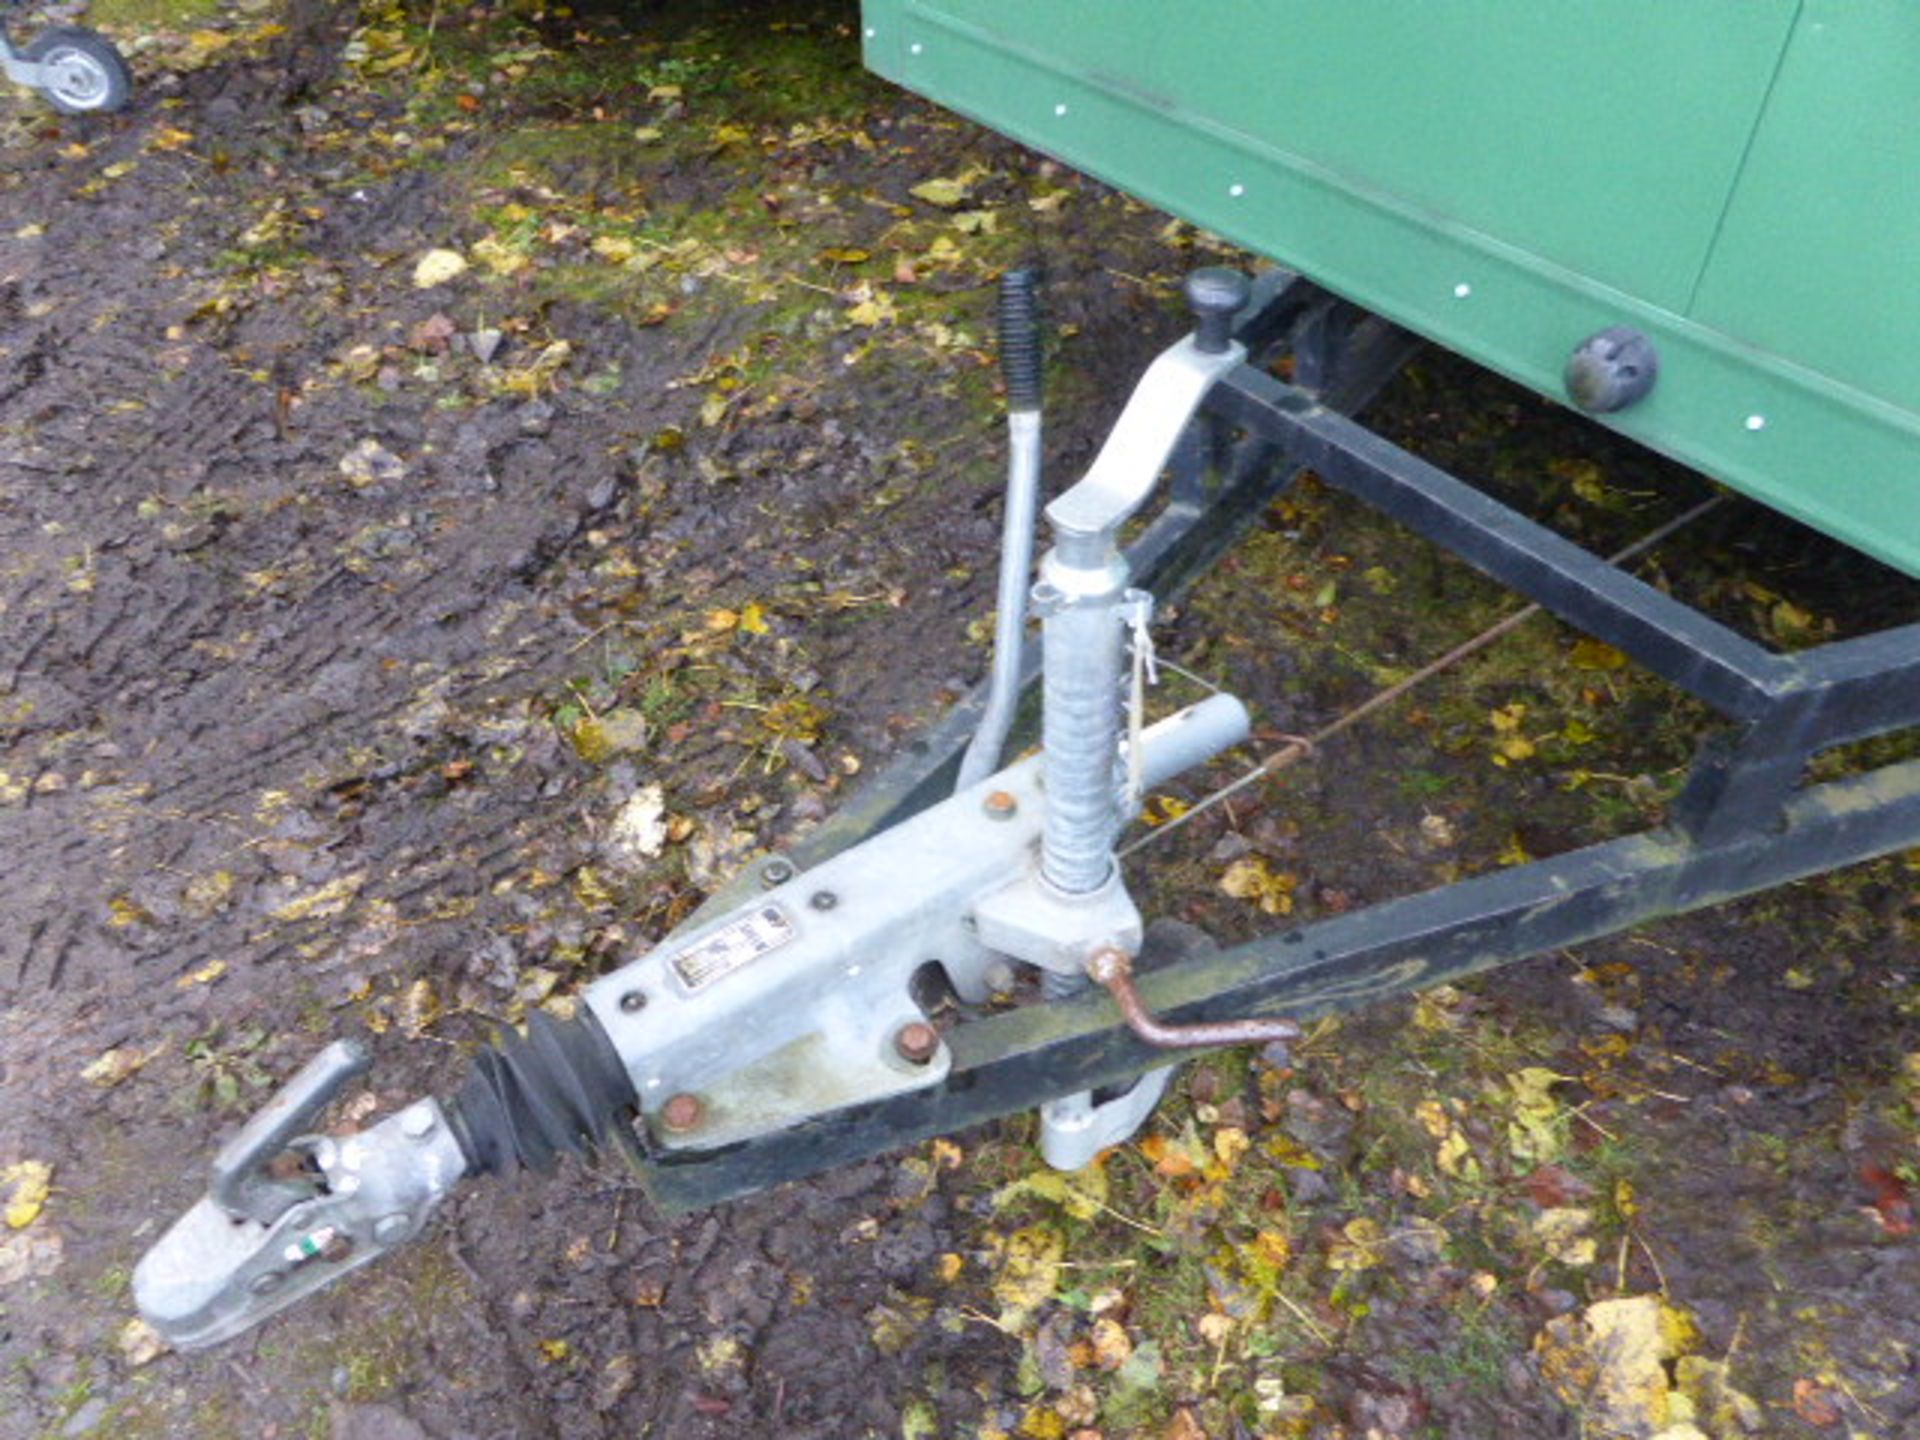 Springfield standard single axle toilet trailer 3 + 1 + urinal toilet trailer with mains connection - Image 9 of 20